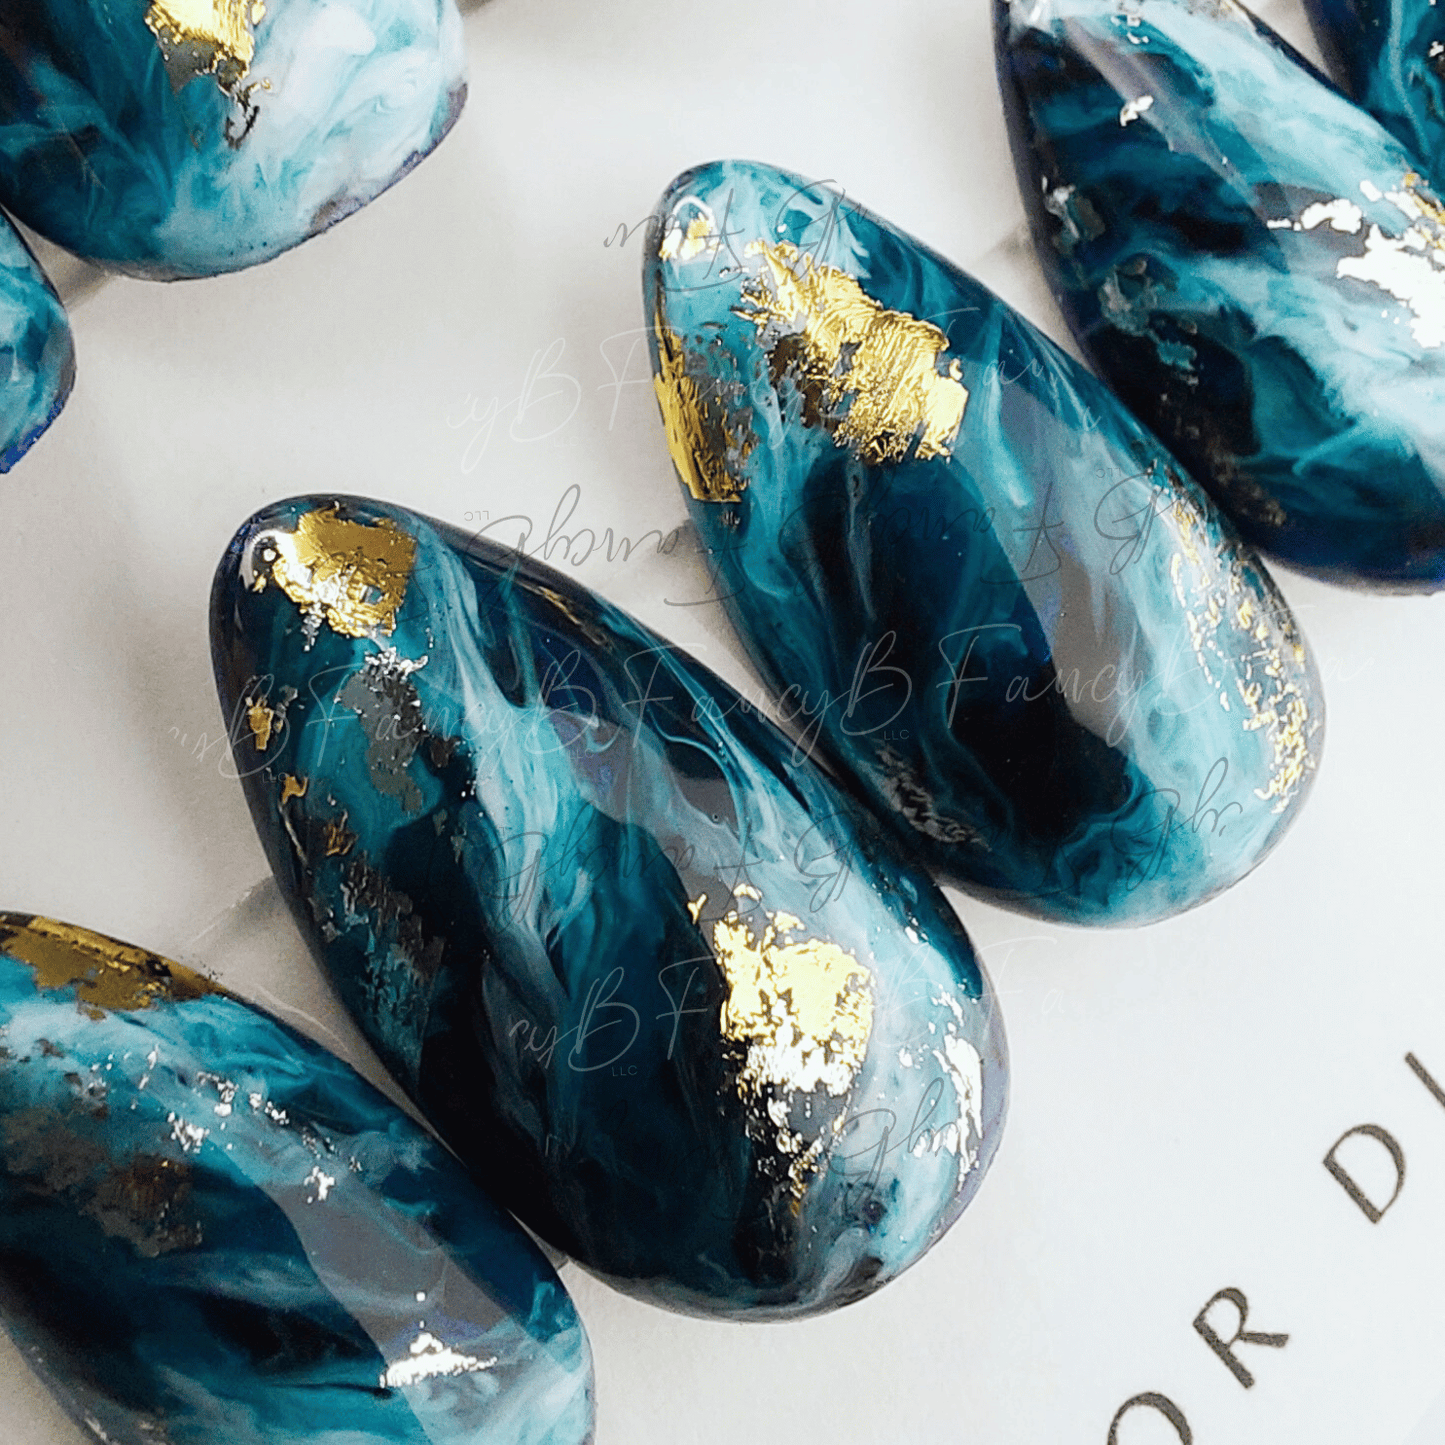 Blue ocean marble press on nails with gold flakes. FancyB Nails custom press on nail design.